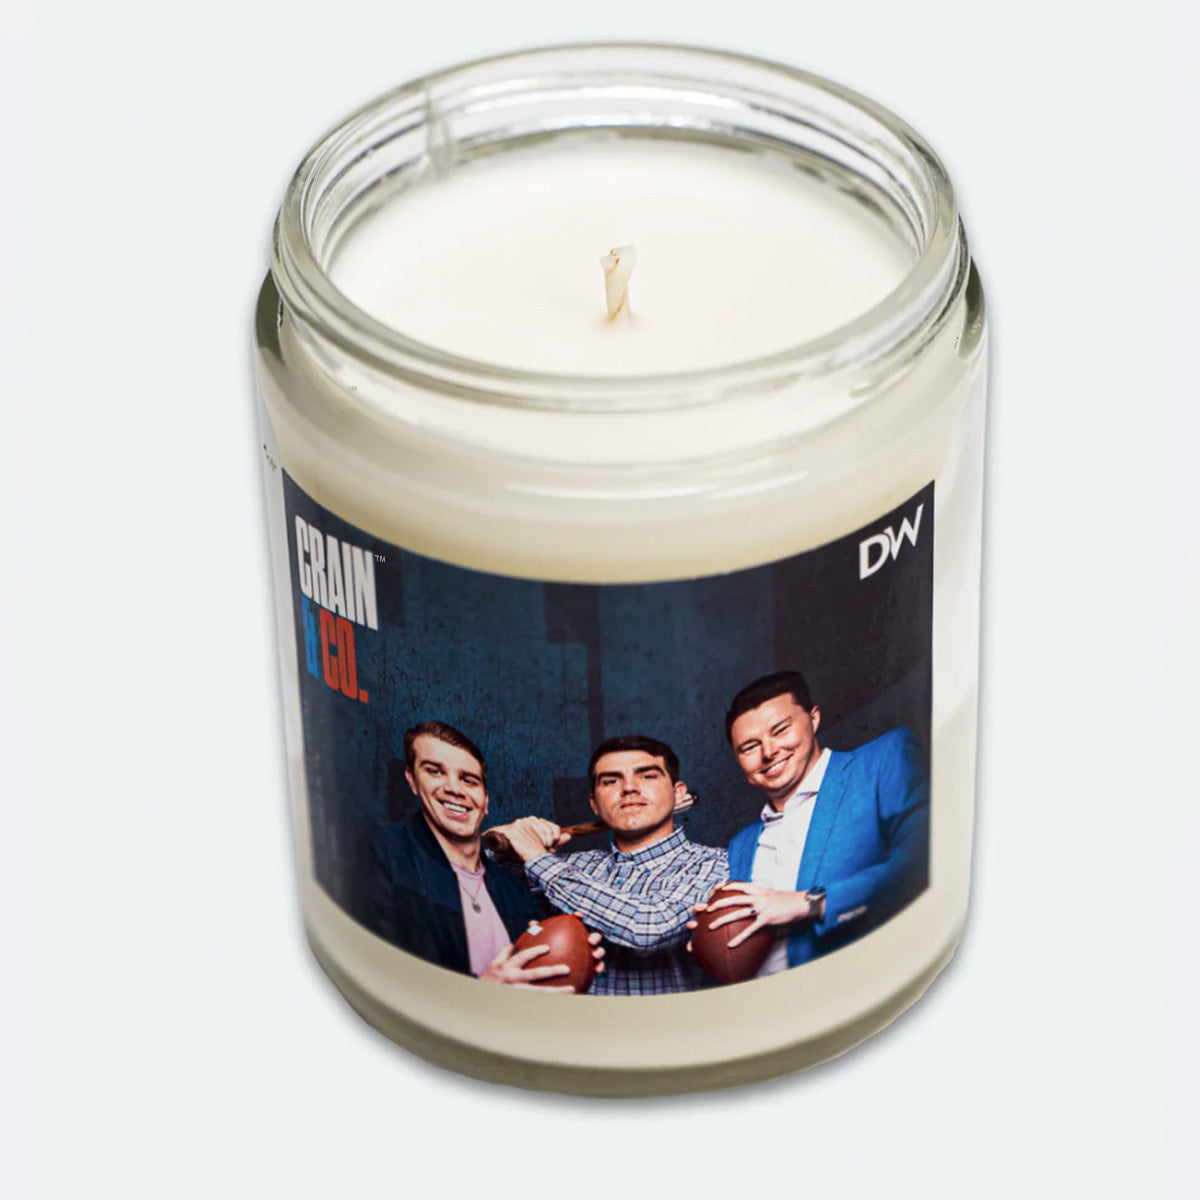 Crain & Co. Candle